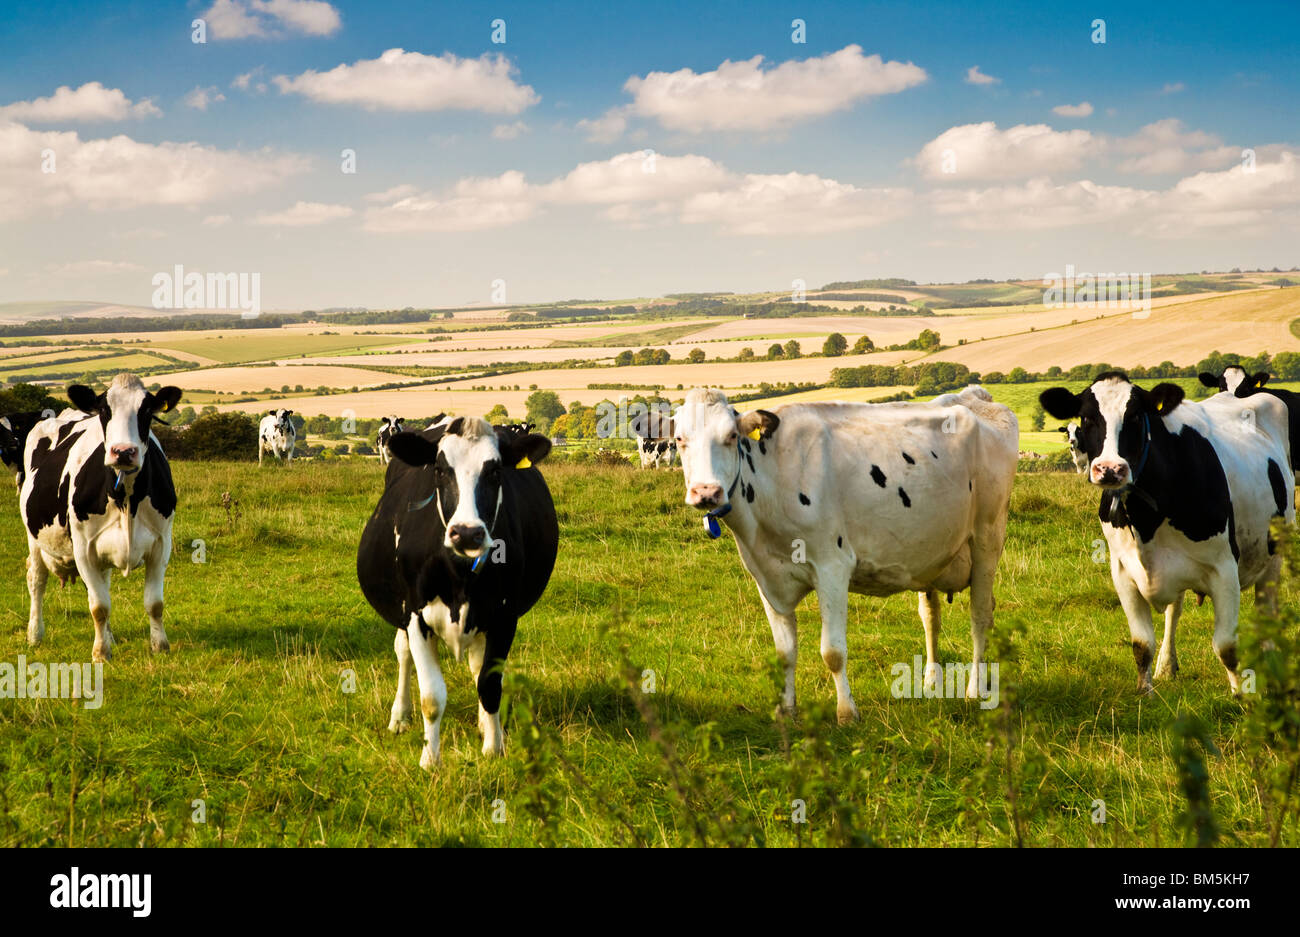 Black and white Holstein Friesian dairy cows in a field on a sunny day with the Marlborough Downs in Wiltshire in the background Stock Photo